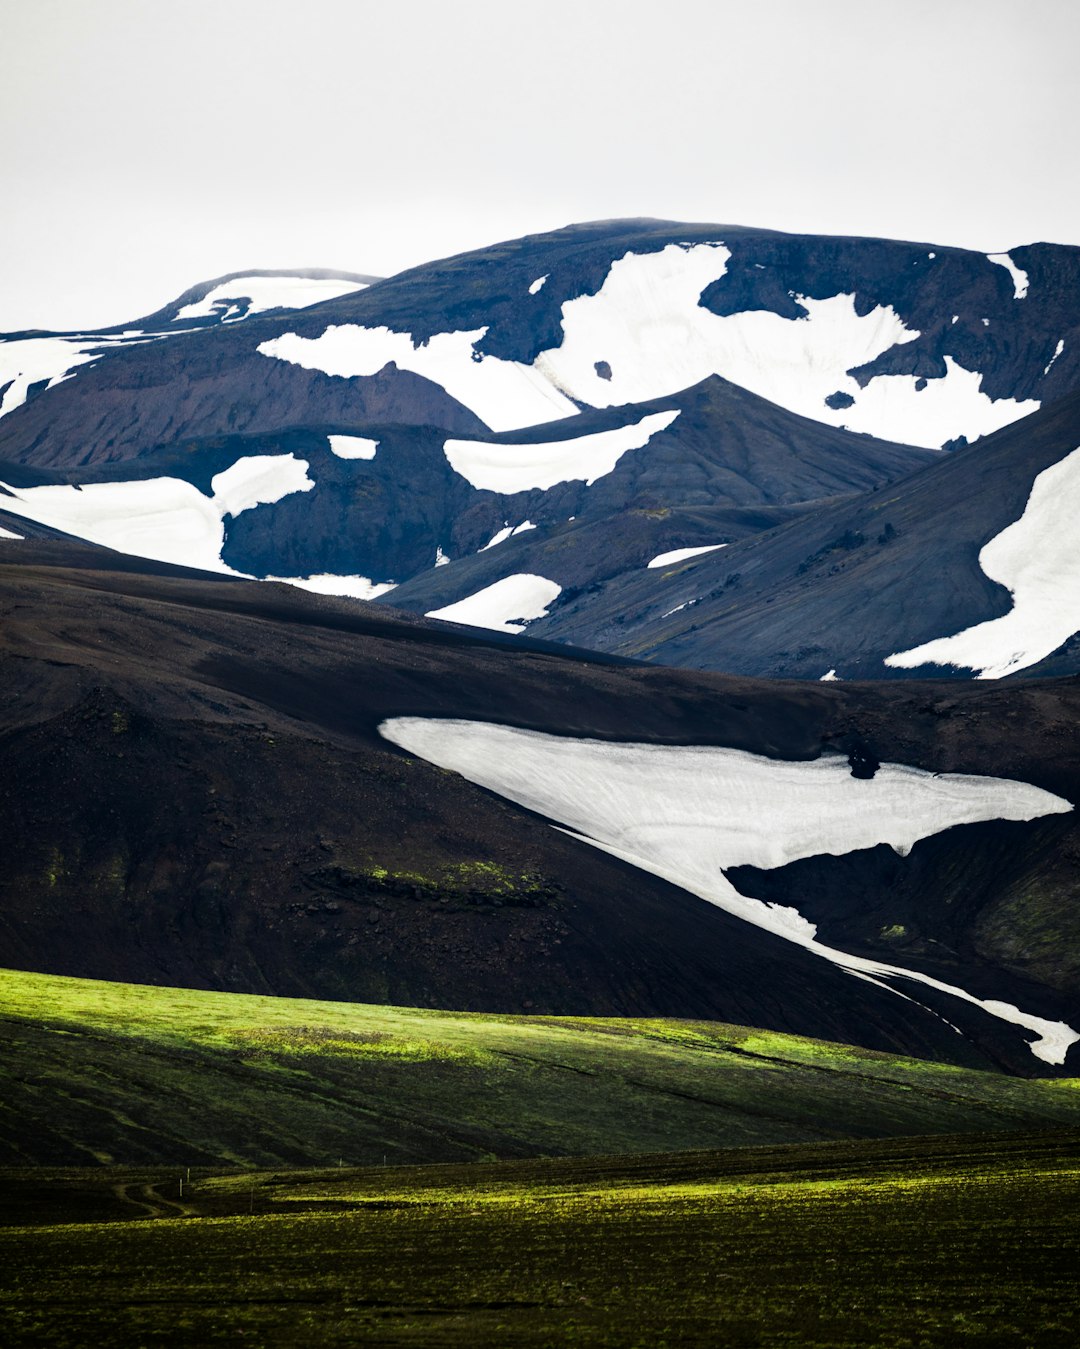 Travel Tips and Stories of Landmannalaugar in Iceland